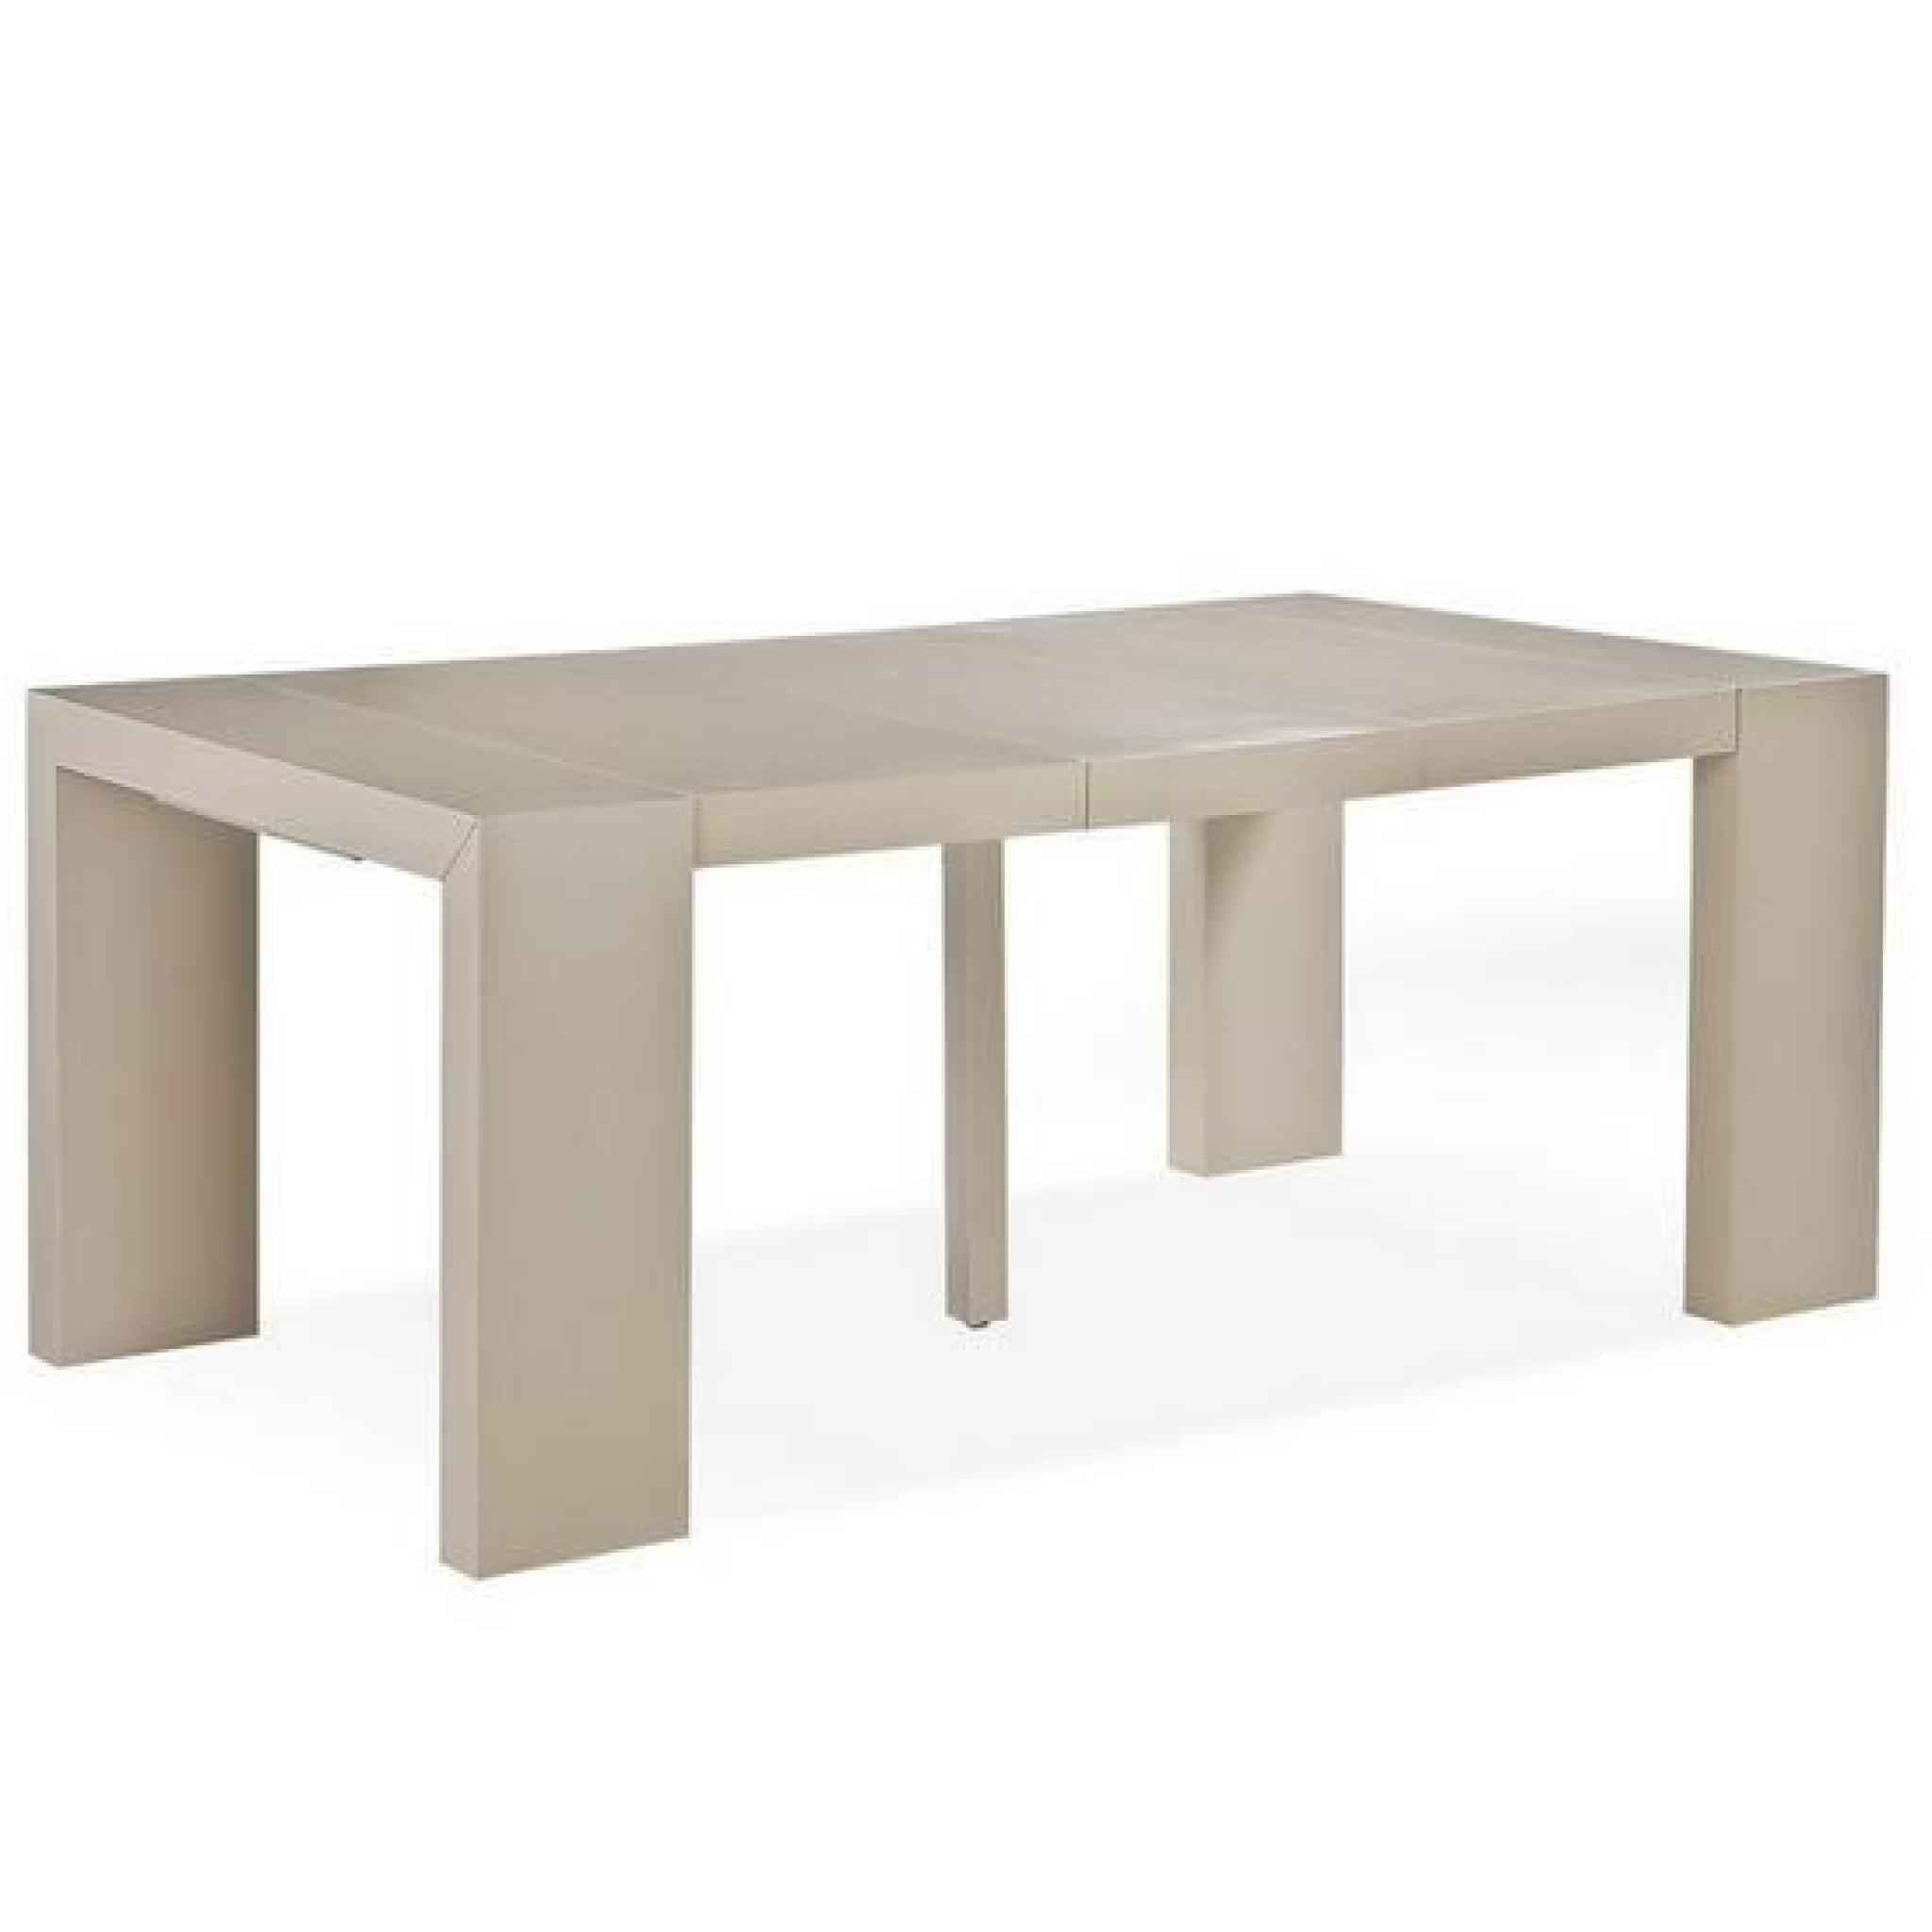 Table Console Extensible Taupe Clair EVAN pas cher